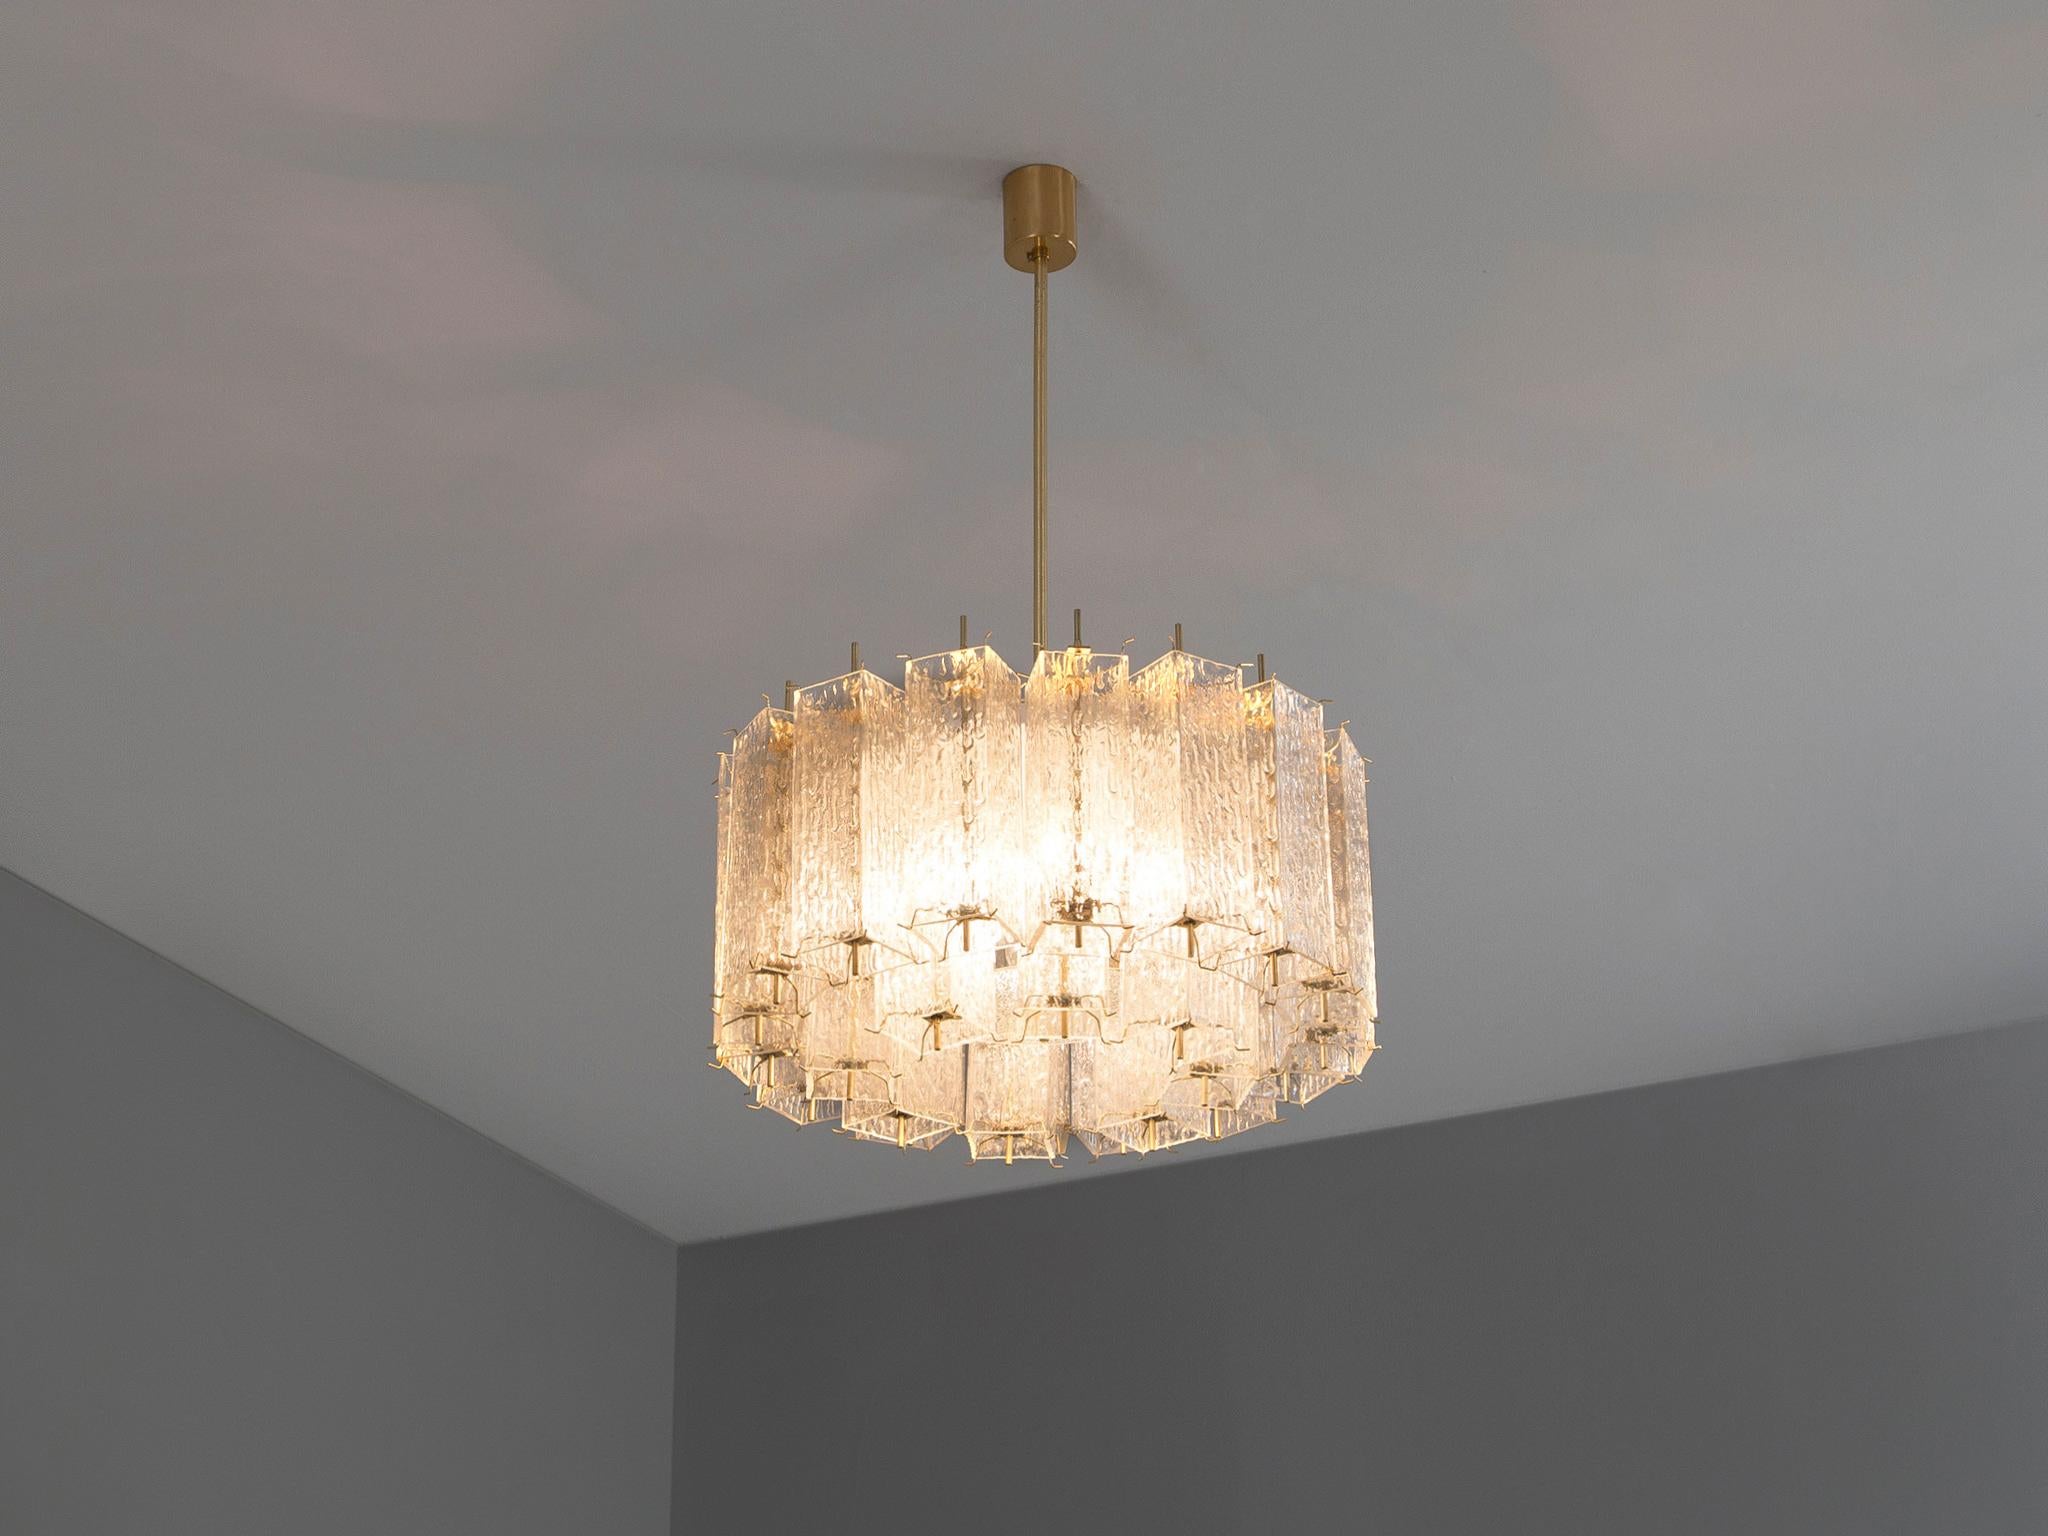 Chandelier, brass, glass, France, 1960s

Magnificent large round brass chandelier of French origin with twenty-four textured glass shades. This lamp is handcrafted and consists of two alternating rows. The inner row is composed of eight glass